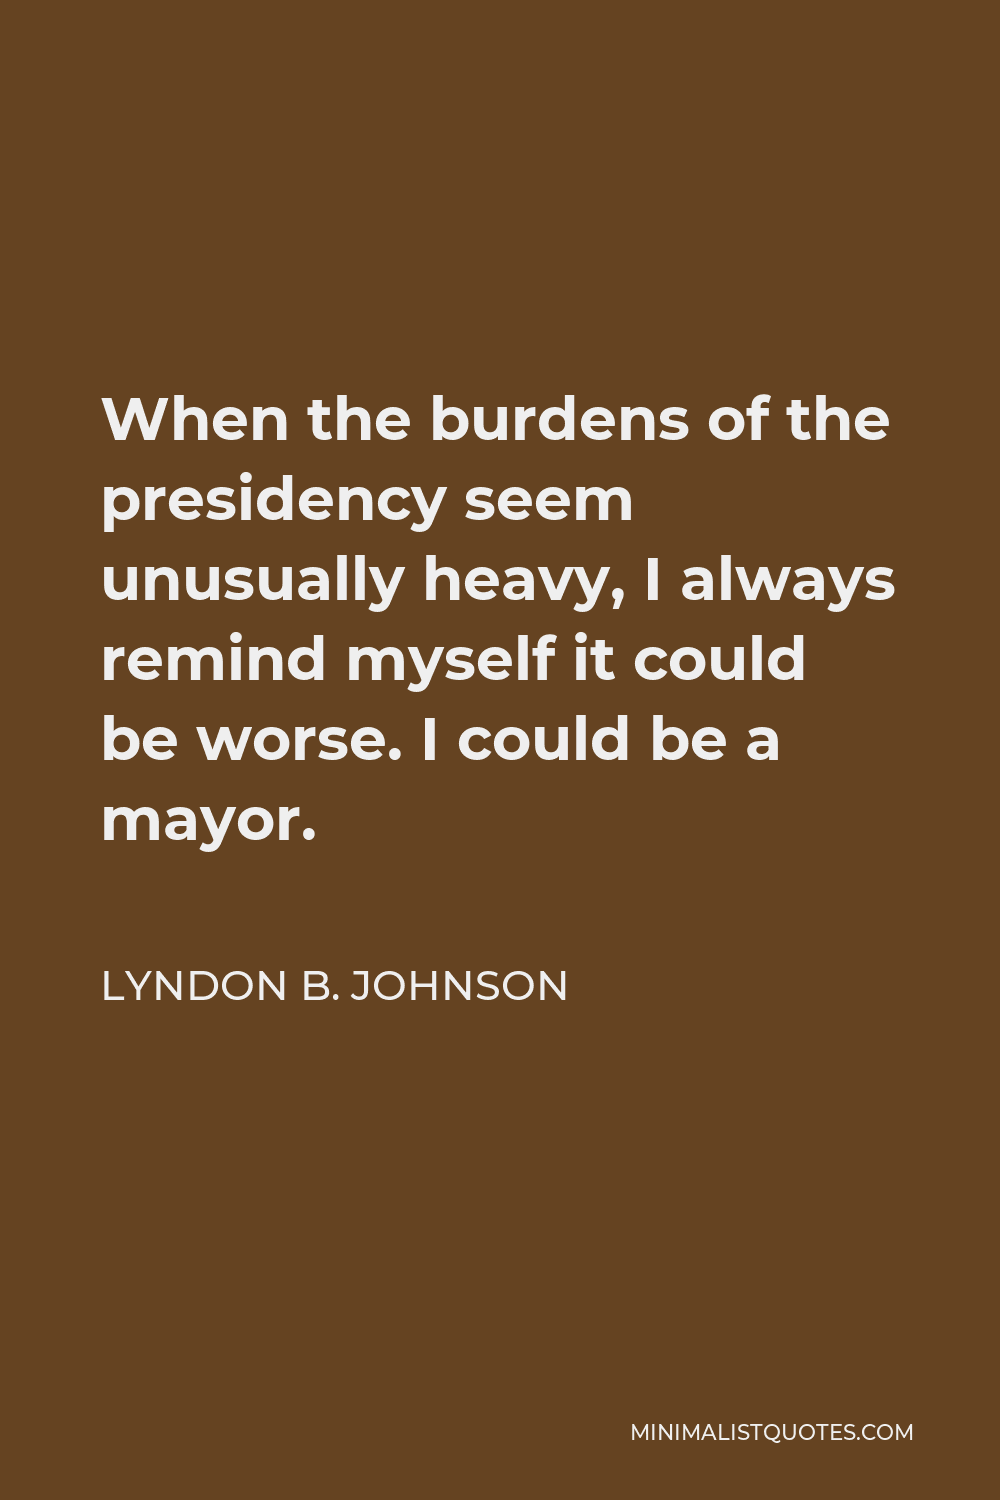 Lyndon B. Johnson Quote - When the burdens of the presidency seem unusually heavy, I always remind myself it could be worse. I could be a mayor.